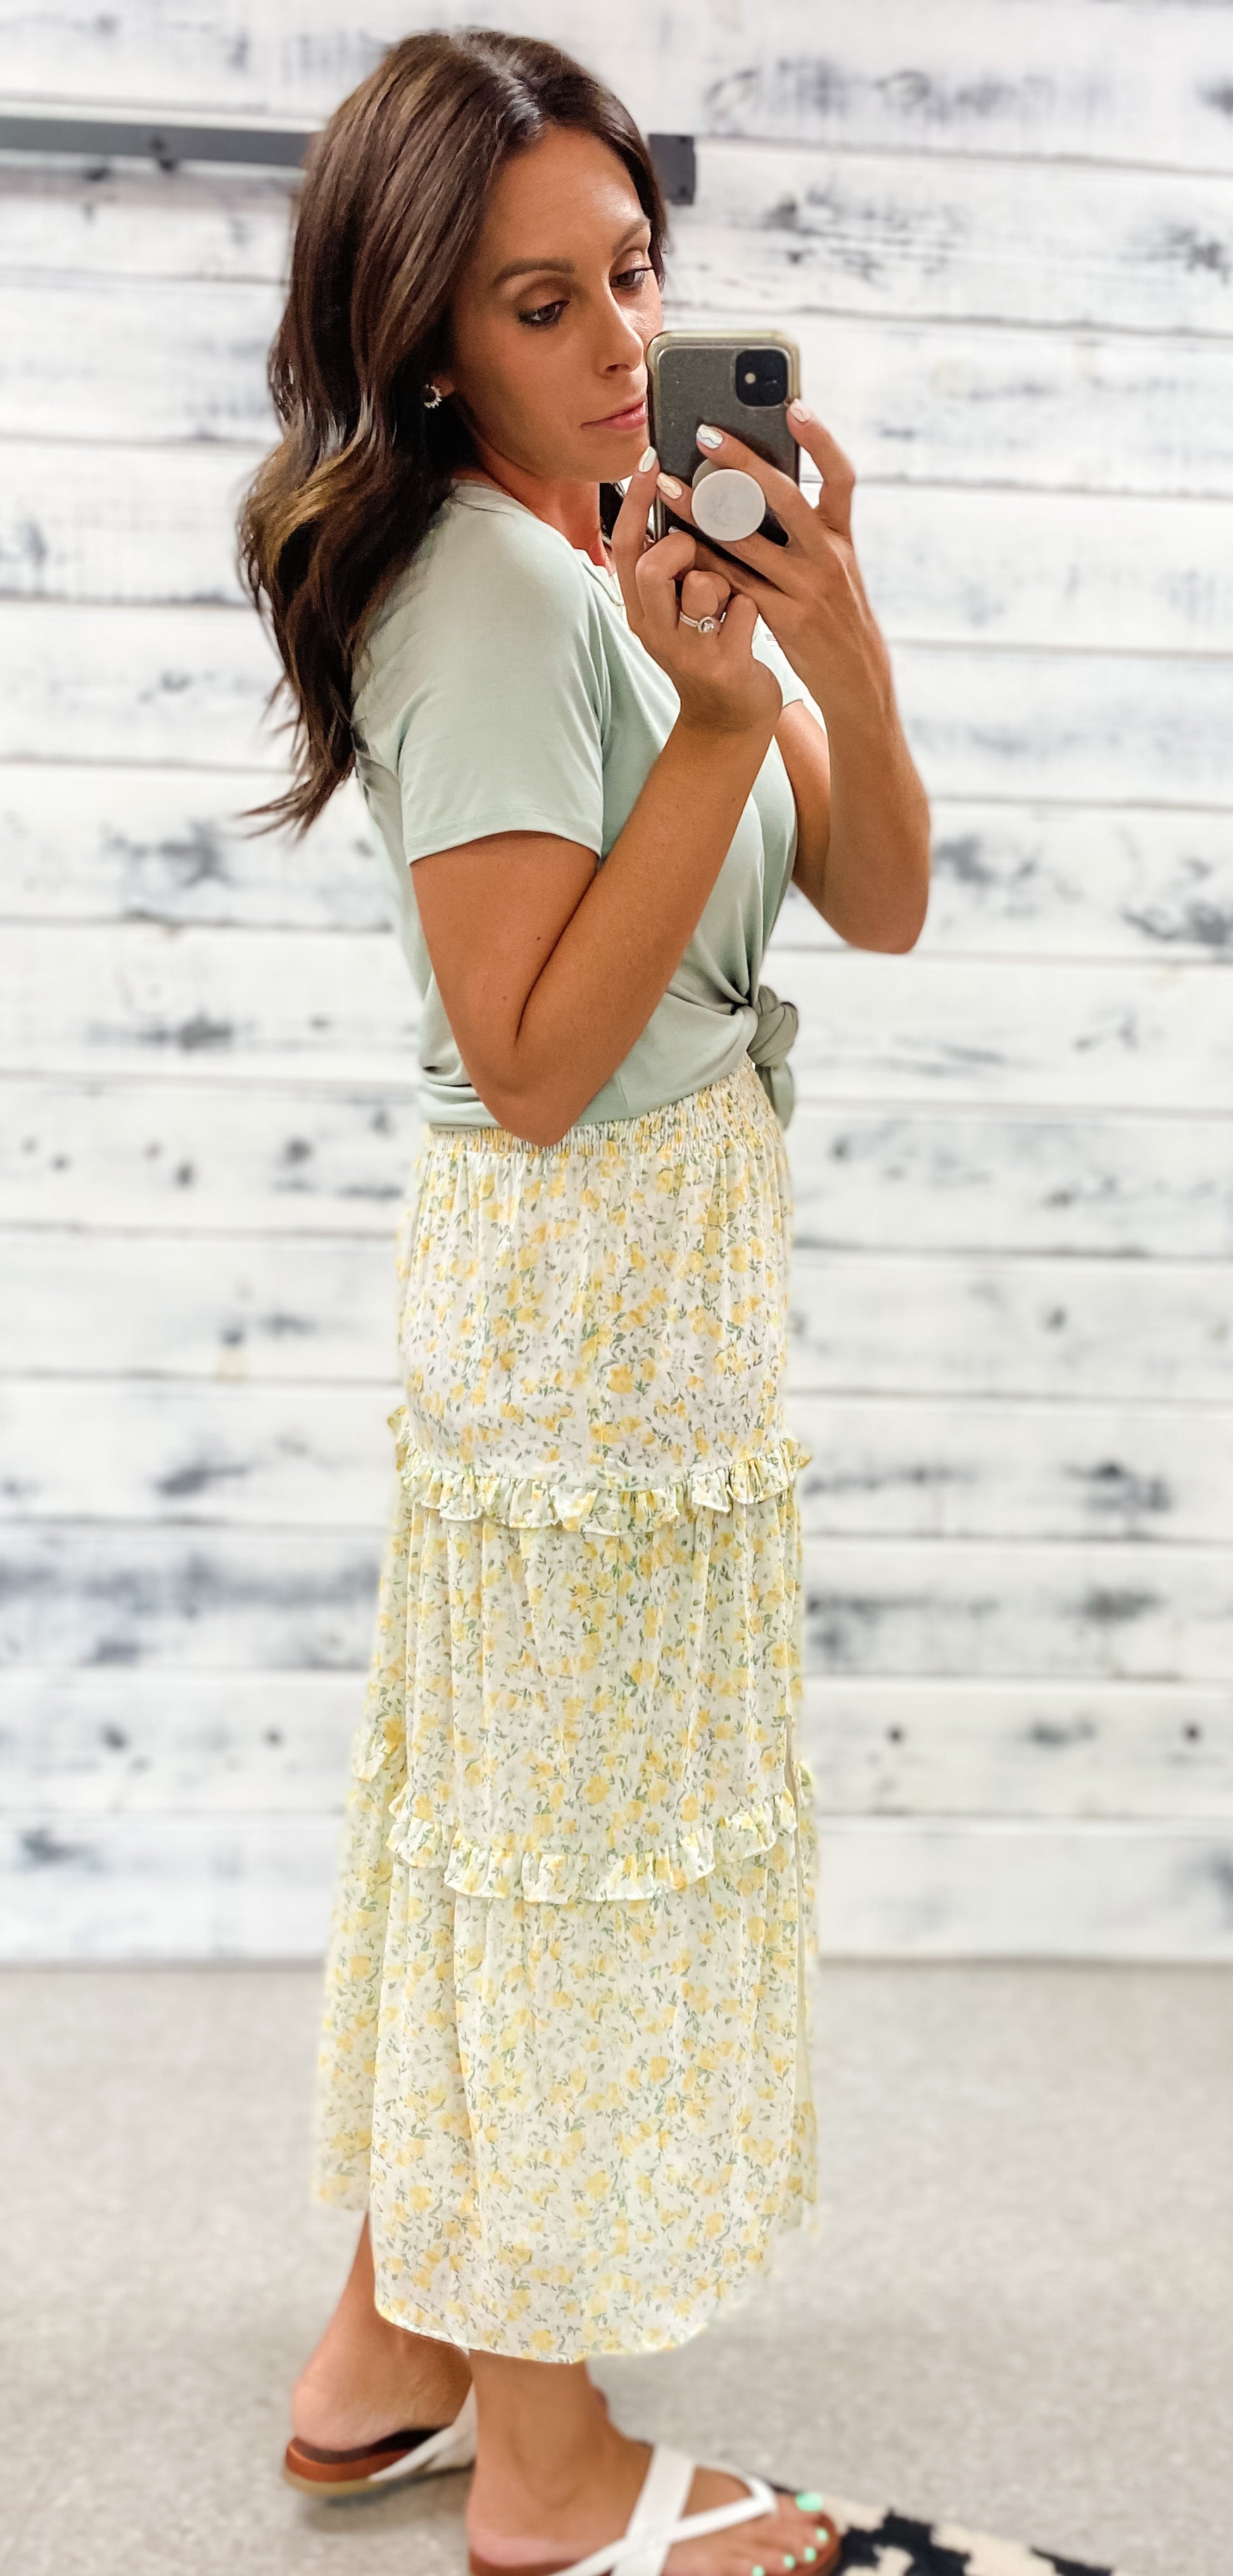 Yellow Pleated Maxi Skirt at Lookbook Store - Trendslove | Hot fashion,  Hottest fashion trends, Maxi skirt dress